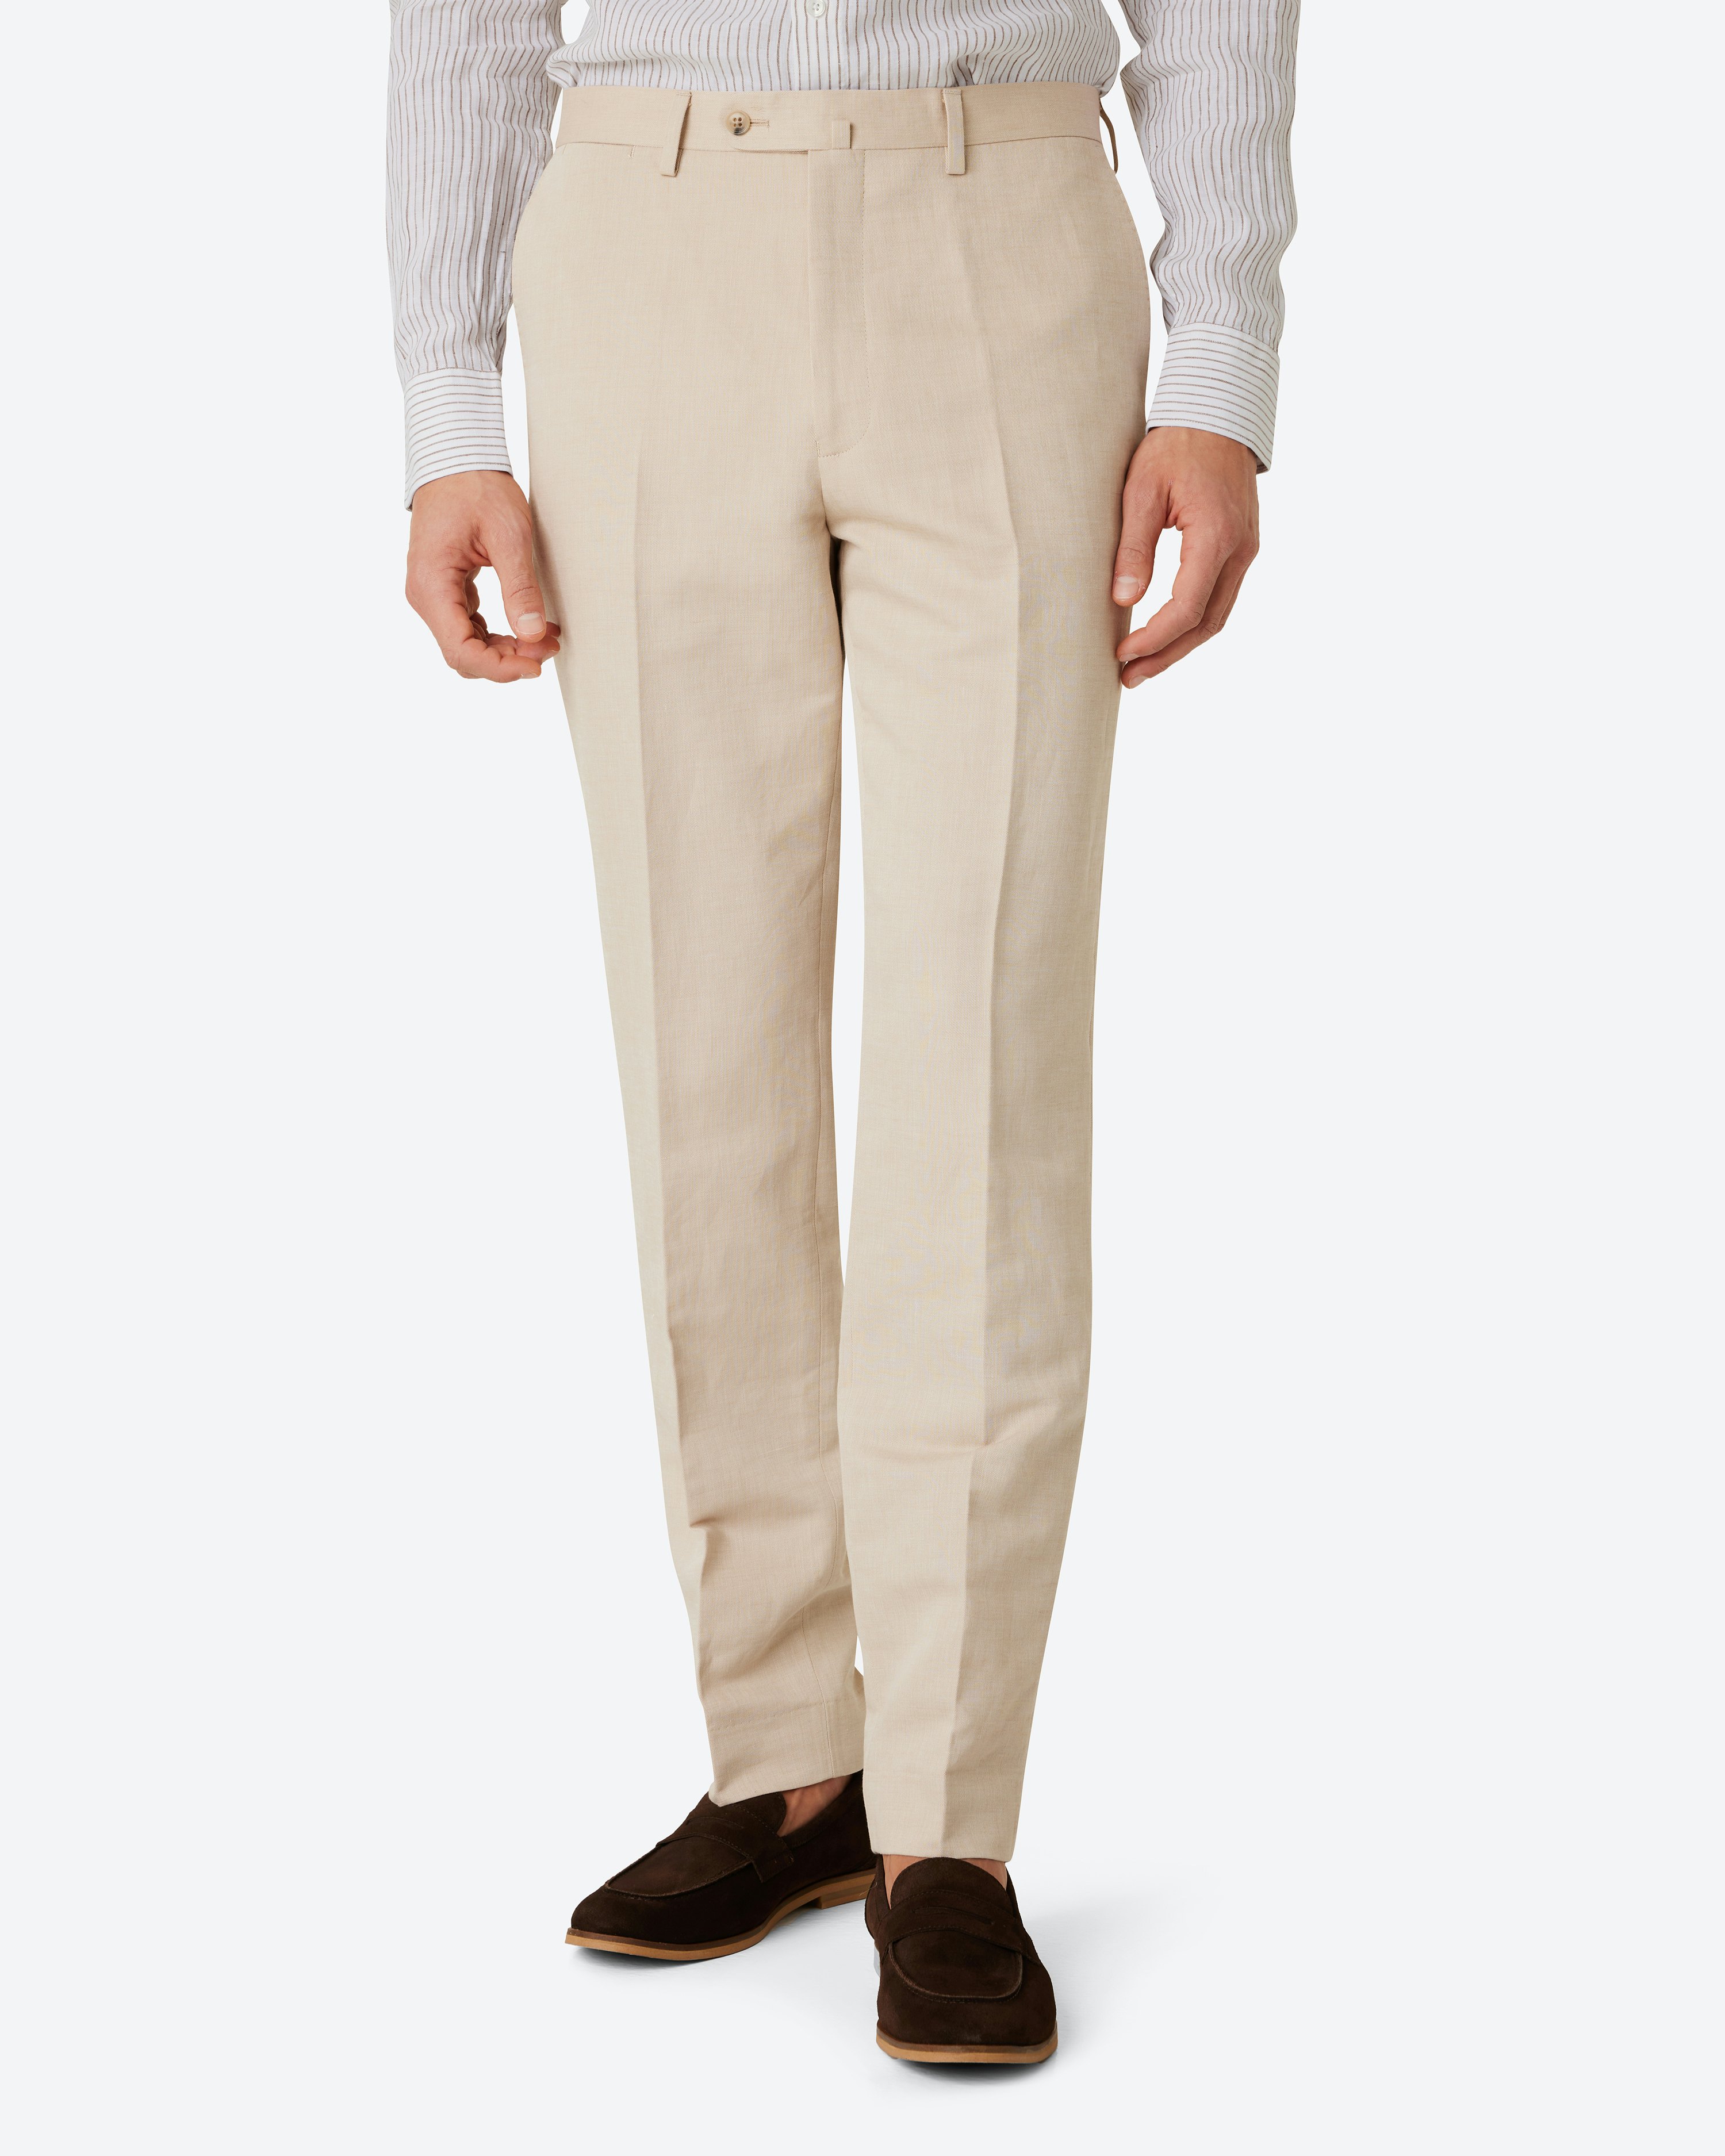 SOJANYA Formal Trousers  Buy SOJANYA Men Cotton Blend Blue  Off White  Checked Formal Trousers Online  Nykaa Fashion